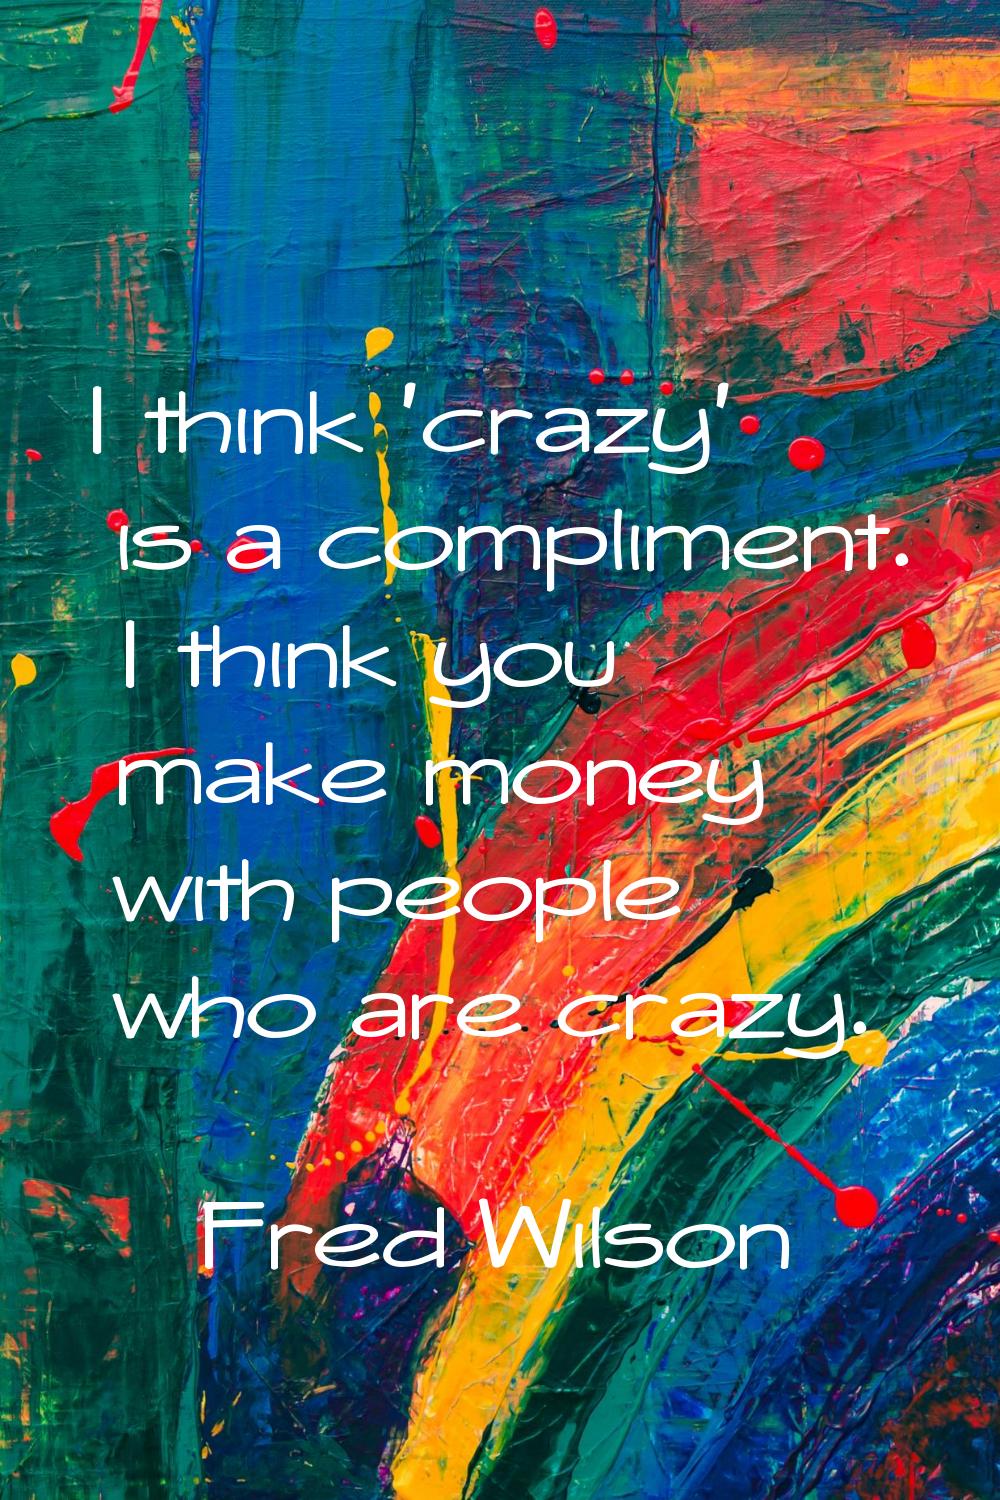 I think 'crazy' is a compliment. I think you make money with people who are crazy.